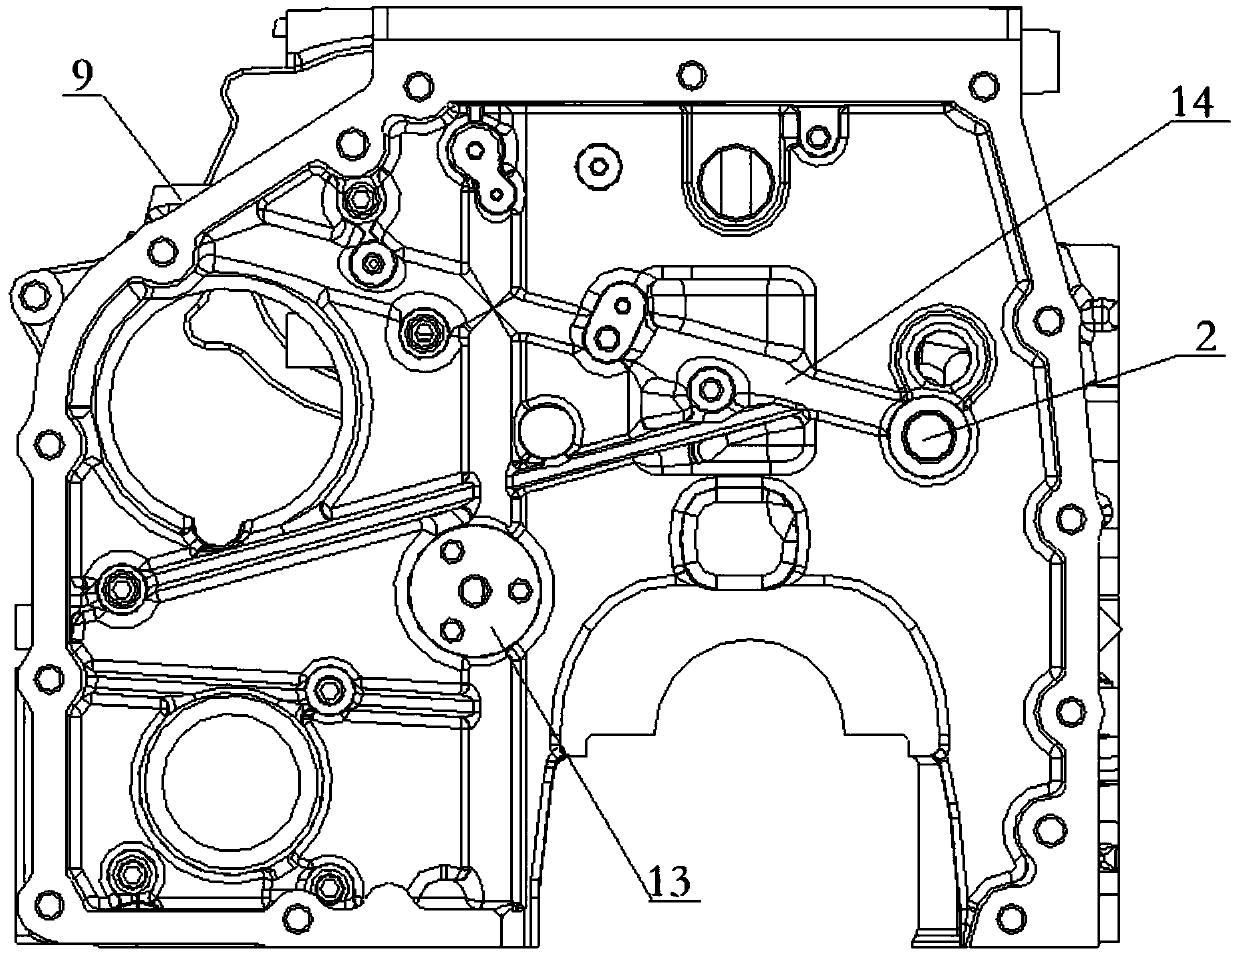 Oil way structure of cylinder block engine